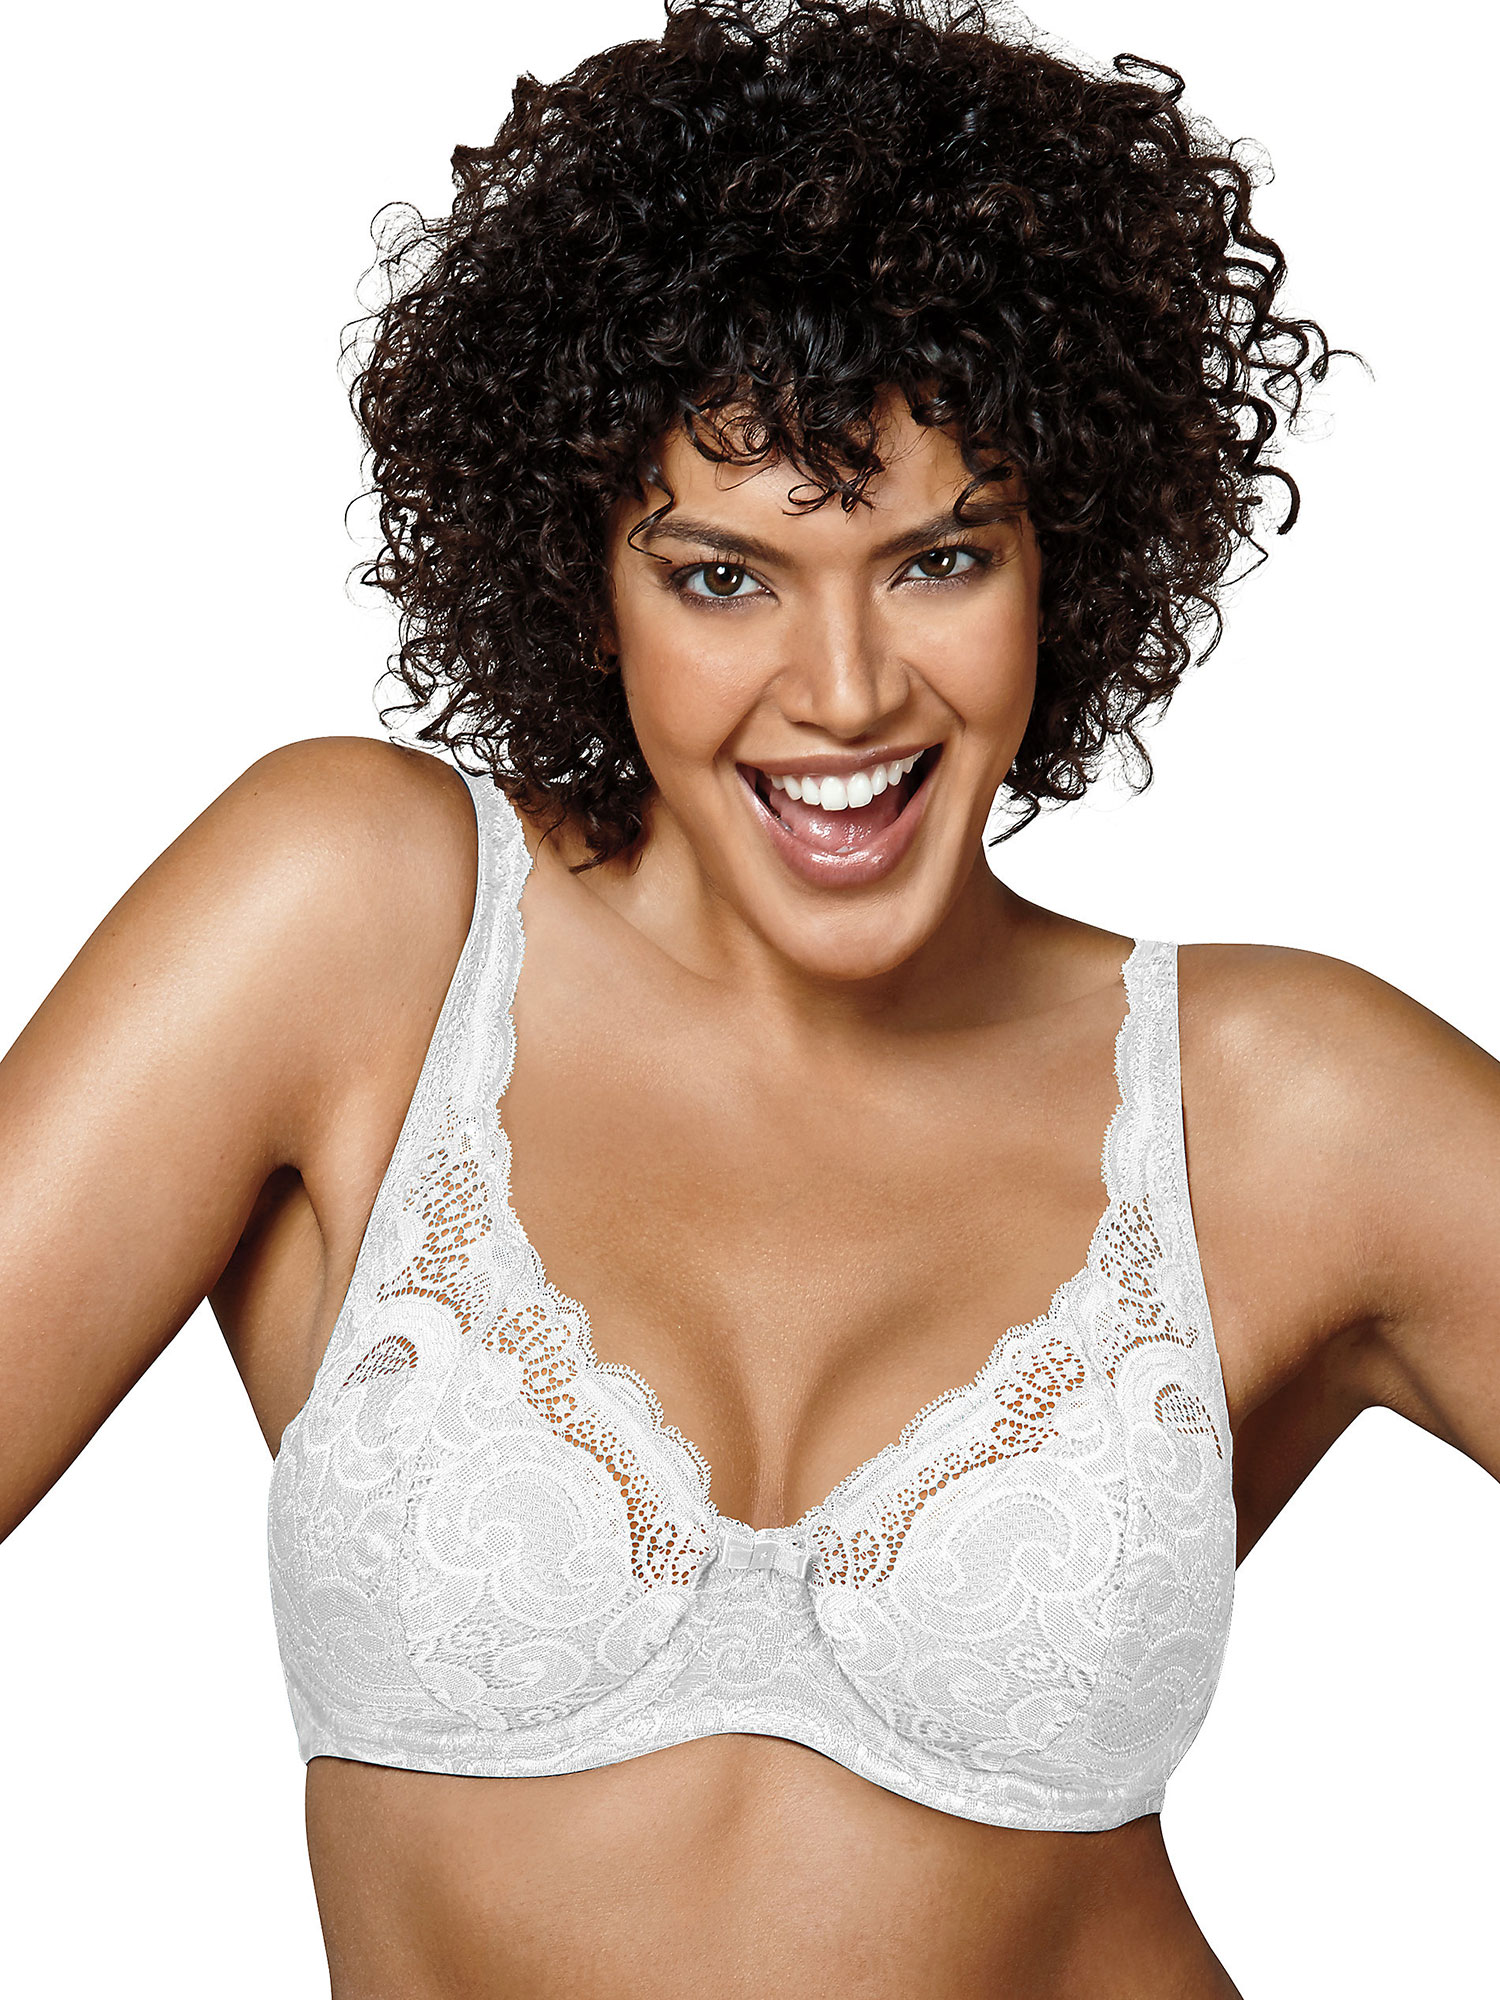 Playtex Secrets Beautiful Lift Lightly Lined Underwire Bra White 36D Women's - image 1 of 2